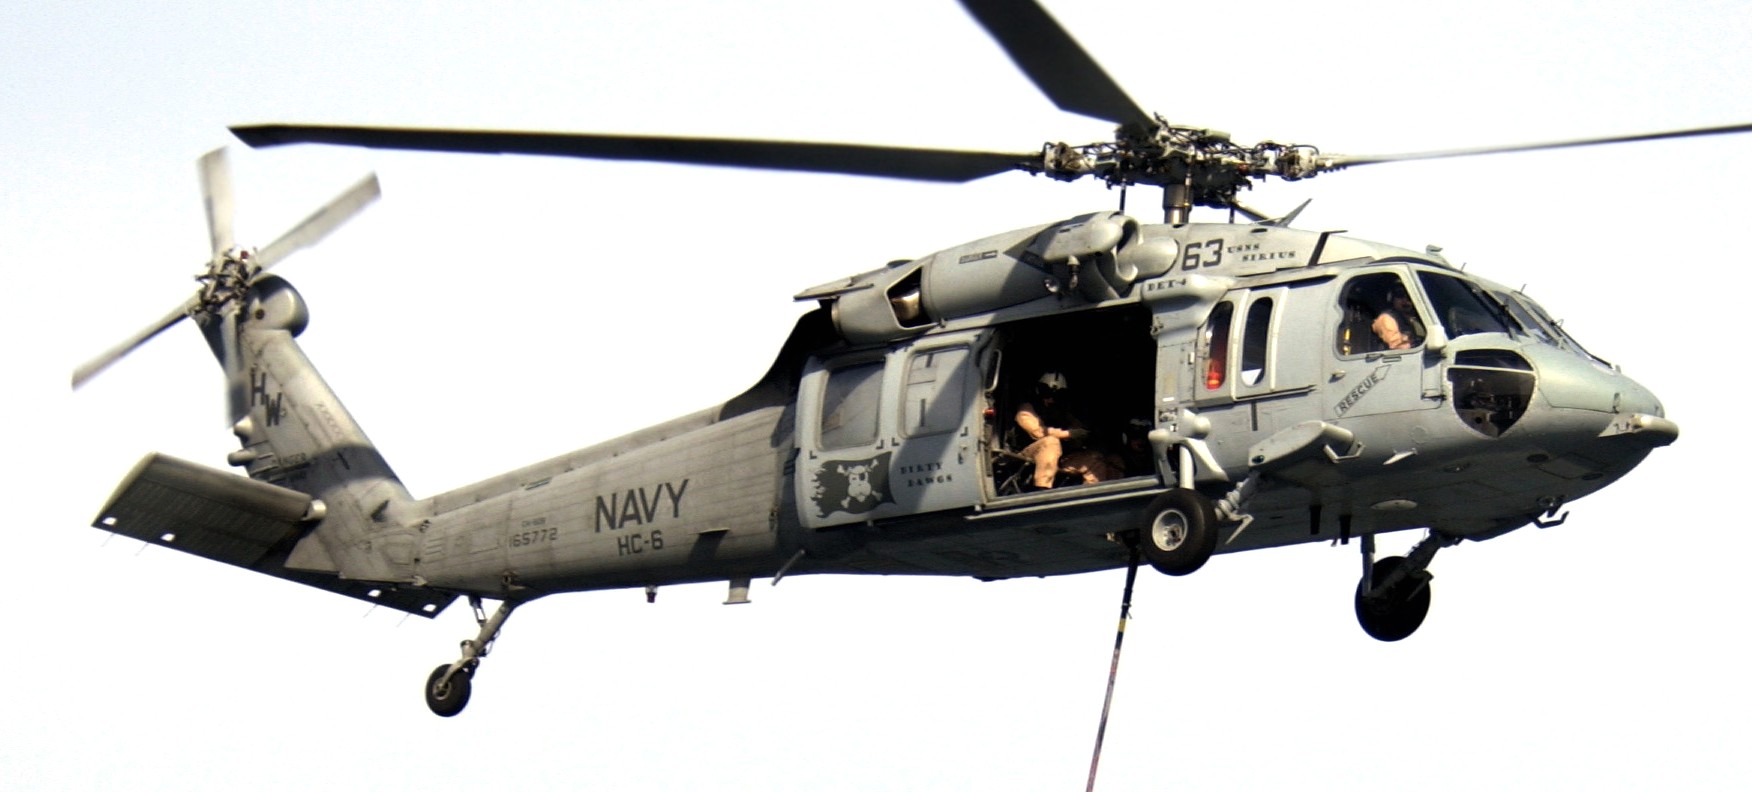 hc-6 chargers helicopter combat support squadron navy mh-60s seahawk 24